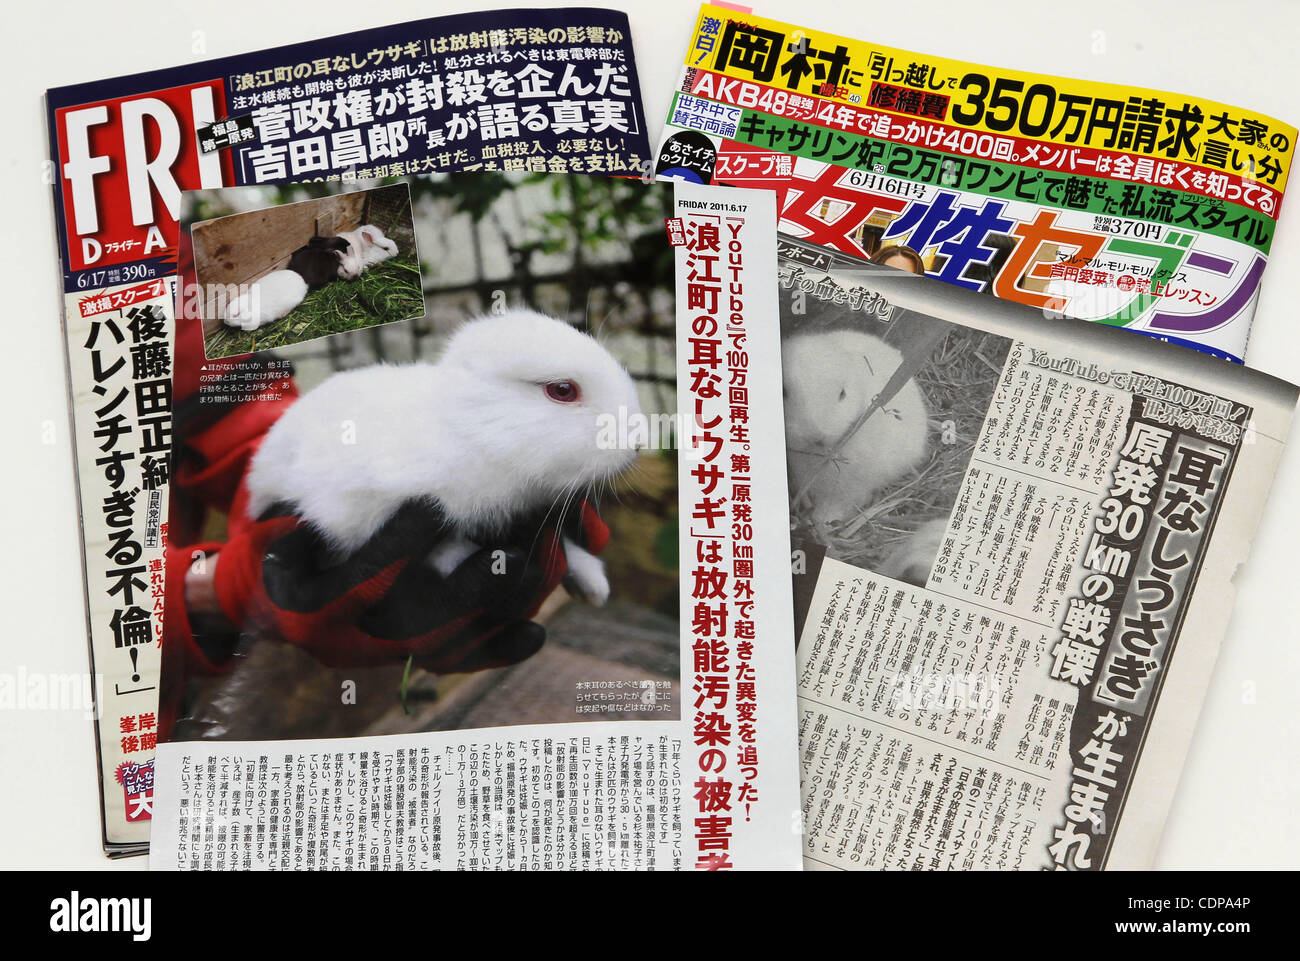 June 4, 2011 - Fukushima, Japan - Local weekly magazines, FRIDAY and Josei Seven are seen with articles on the new-born rabbit without ears found in Namie Town which is located just outside the 30km exclusion zone of the Fukushima Daiichi nuclear power station in Fukushima Prefecture, Japan. The own Stock Photo